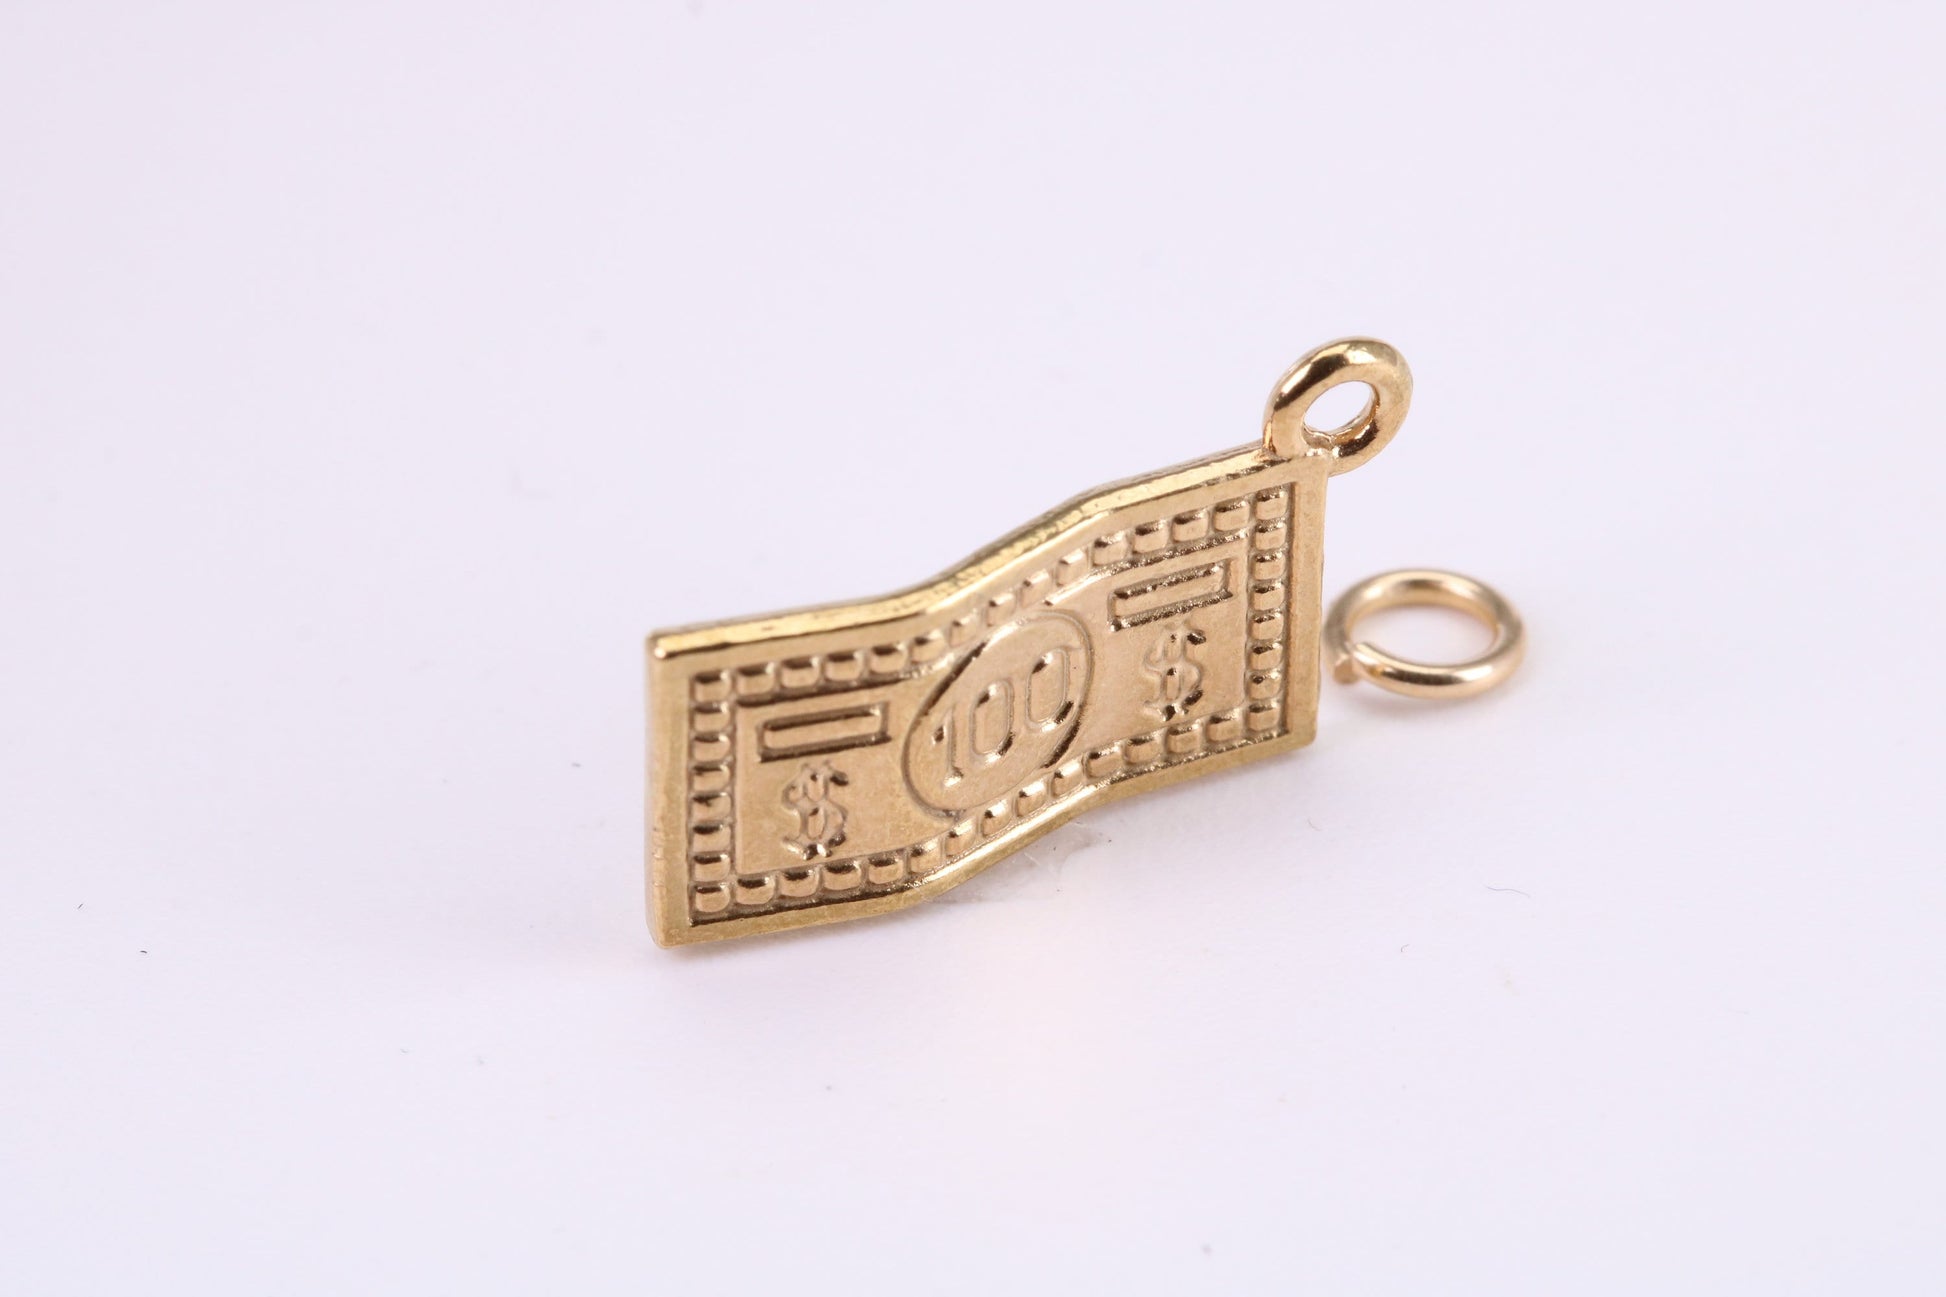 100 Dollar Bill Charm, Traditional Charm, Made from Solid Yellow Gold, British Hallmarked, Complete with Attachment Link